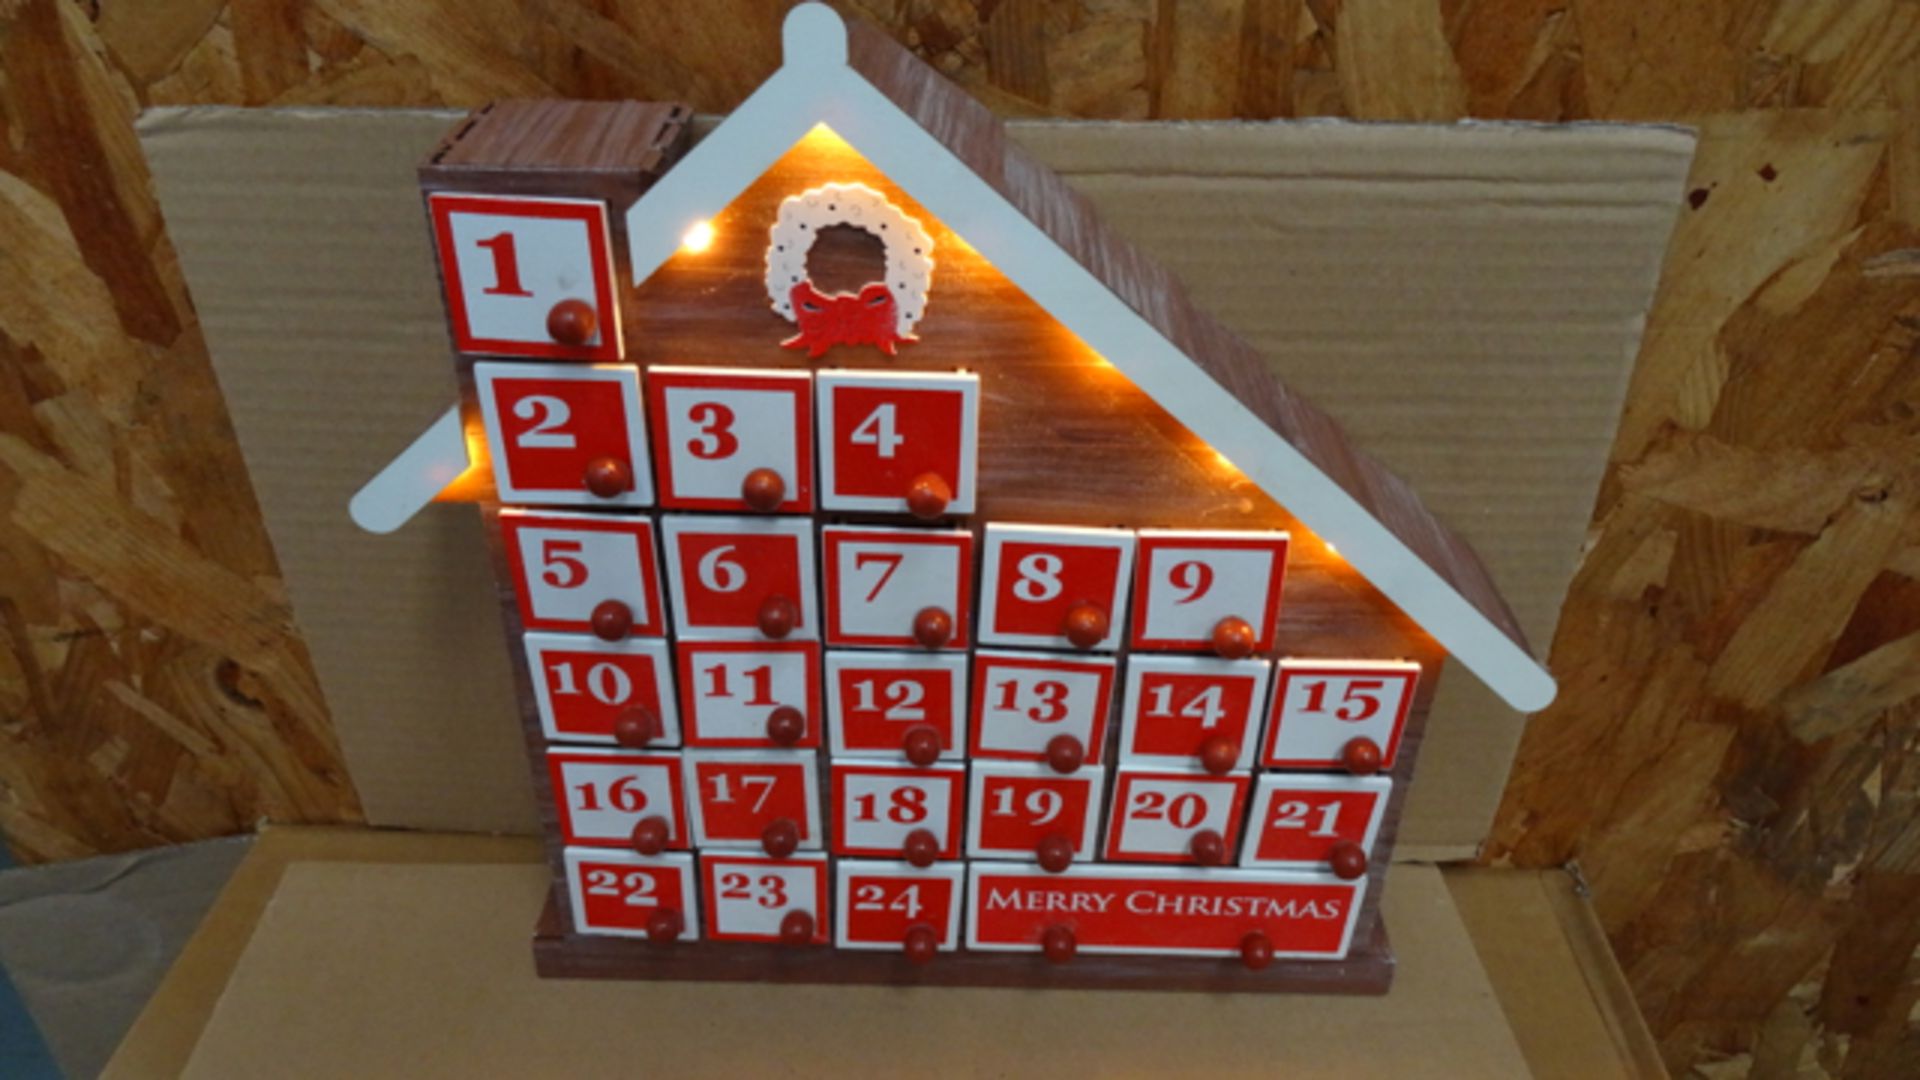 1 x Christmas Workshop Wooden Advent Calendar House with 8 LED Lights. RRP £40!
The Christmas - Image 2 of 2